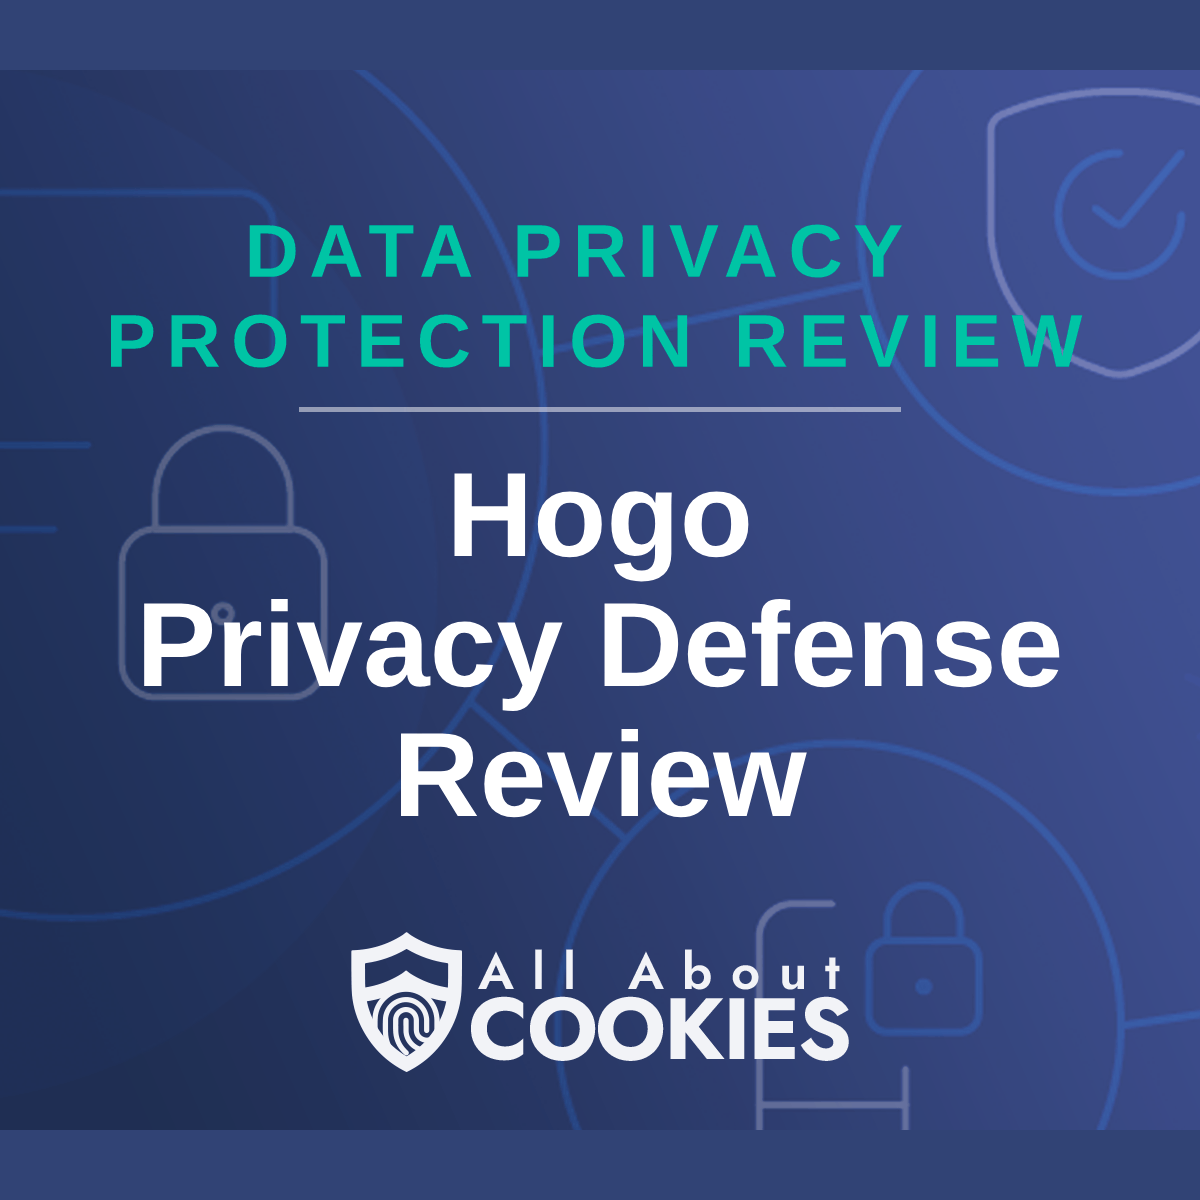 A blue background with images of locks and shields with the text &quot;Hogo Privacy Defense Review&quot; and the All About Cookies logo. 